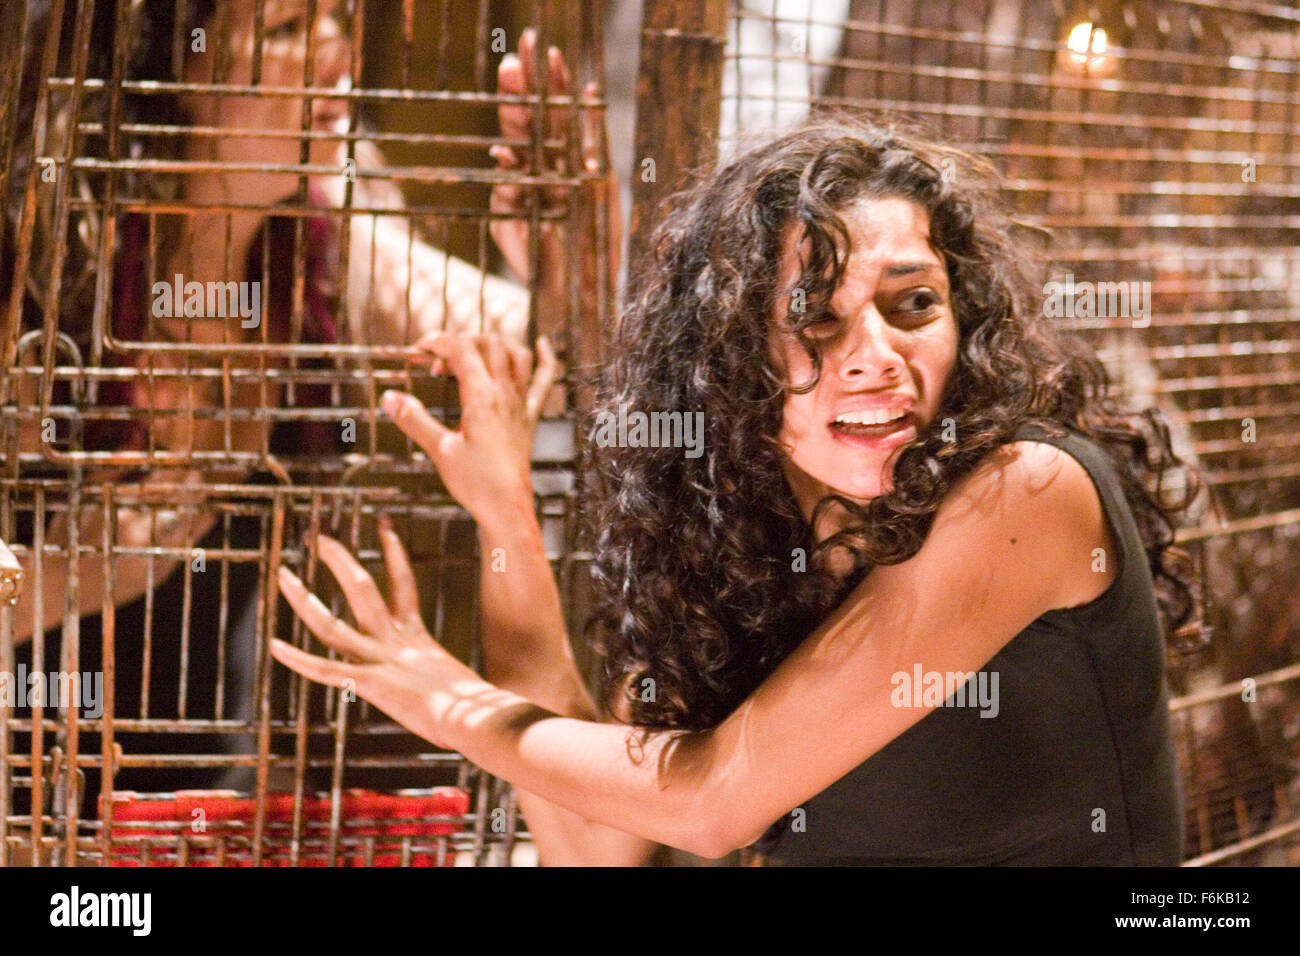 RELEASE DATE: May 6, 2006. MOVIE TITLE: See No Evil. STUDIO: Lions Gate Films. PLOT: A group of delinquents are sent to clean the Blackwell Hotel. Little do they know reclusive psychopath Jacob Goodnight (Jacobs) has holed away in the rotting hotel. PICTURED: CHRISTINA VIDAL as Christina. Stock Photo